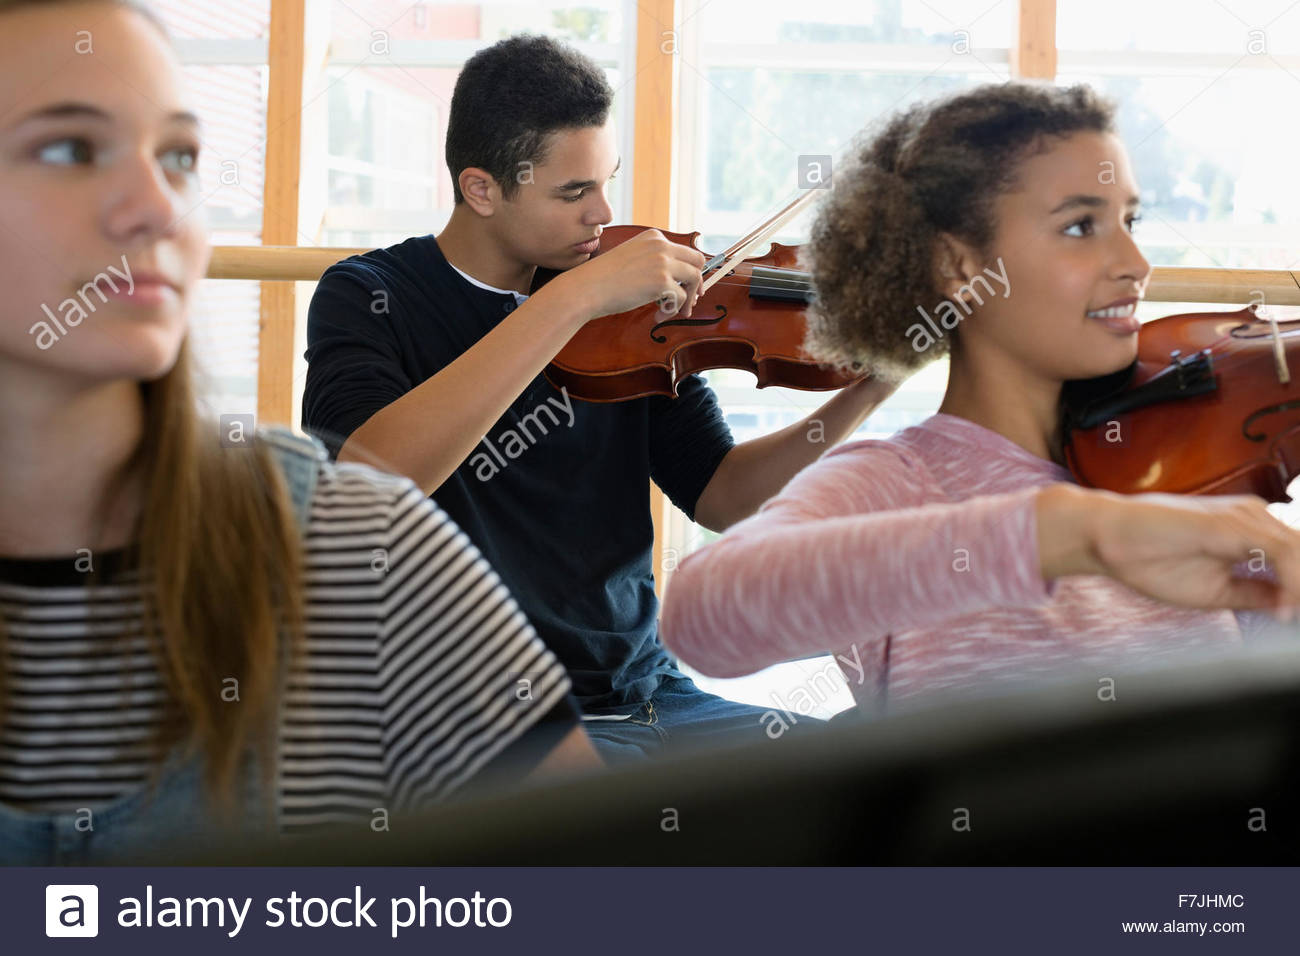 High school students playing violin in music class Stock Photo